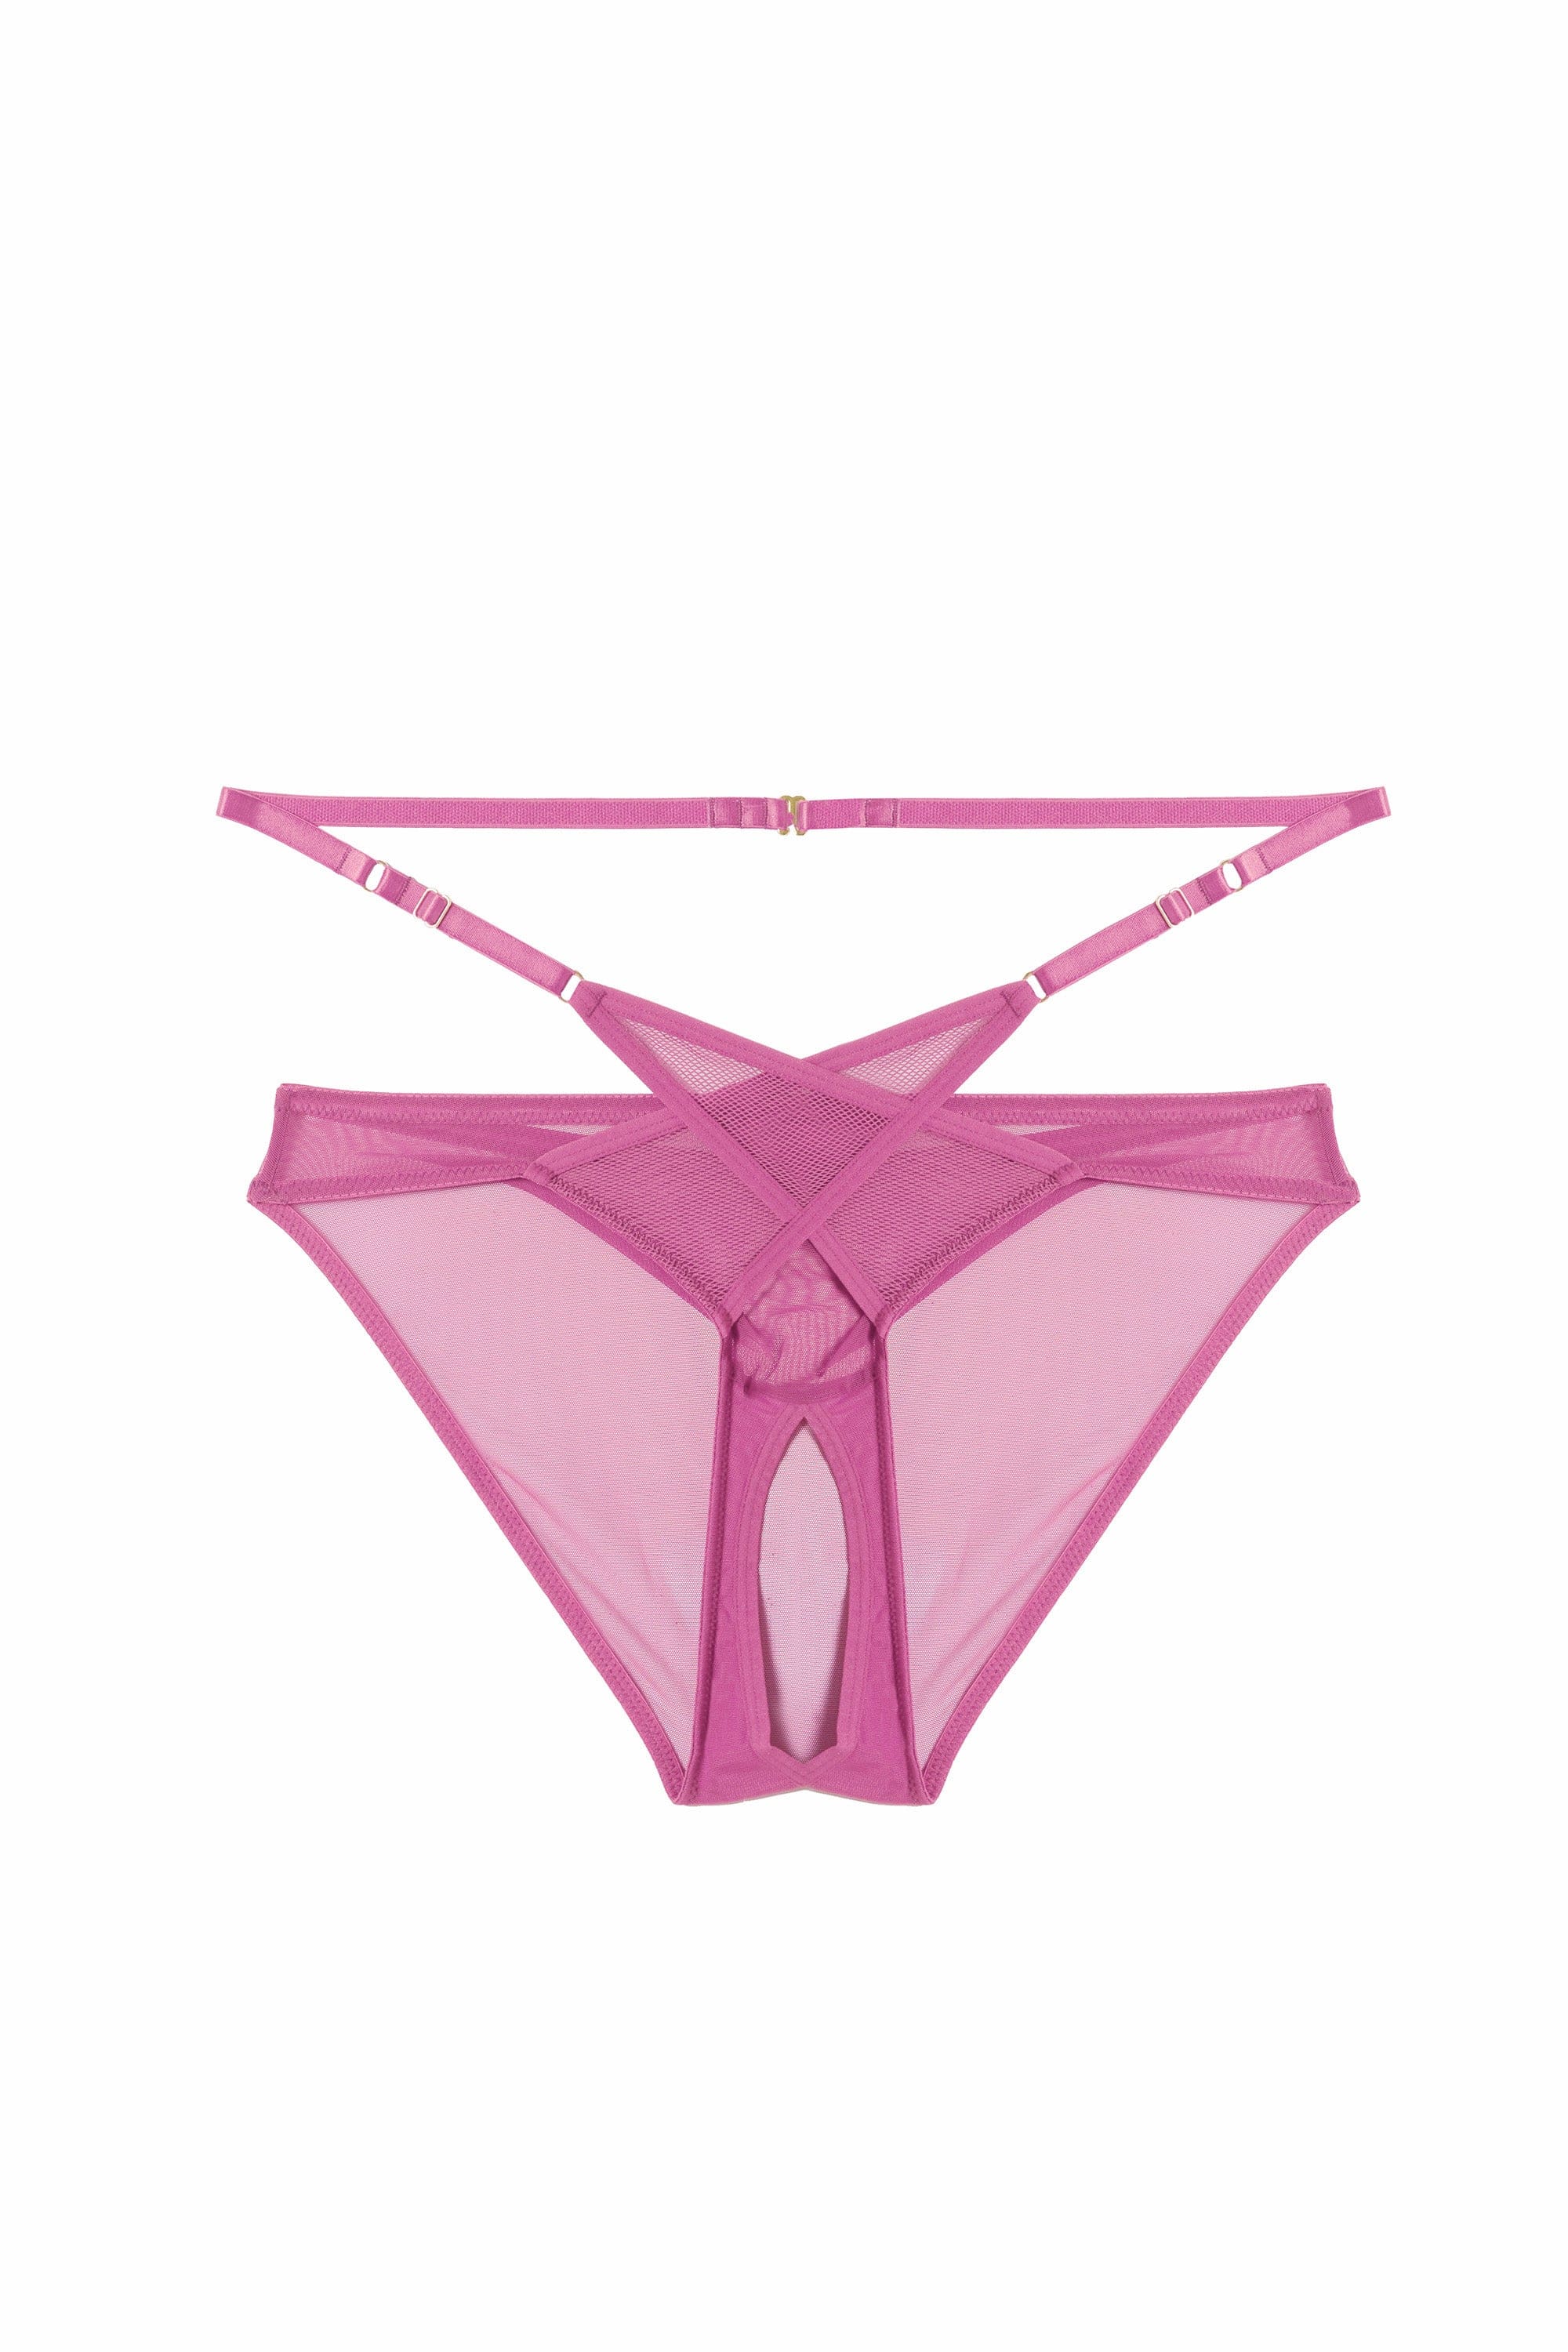 https://us.playfulpromises.com/cdn/shop/products/playful-promises-brief-eddie-pink-crossover-wrap-crotchless-brazilian-brief-29622500982832_2000x.jpg?v=1648487897